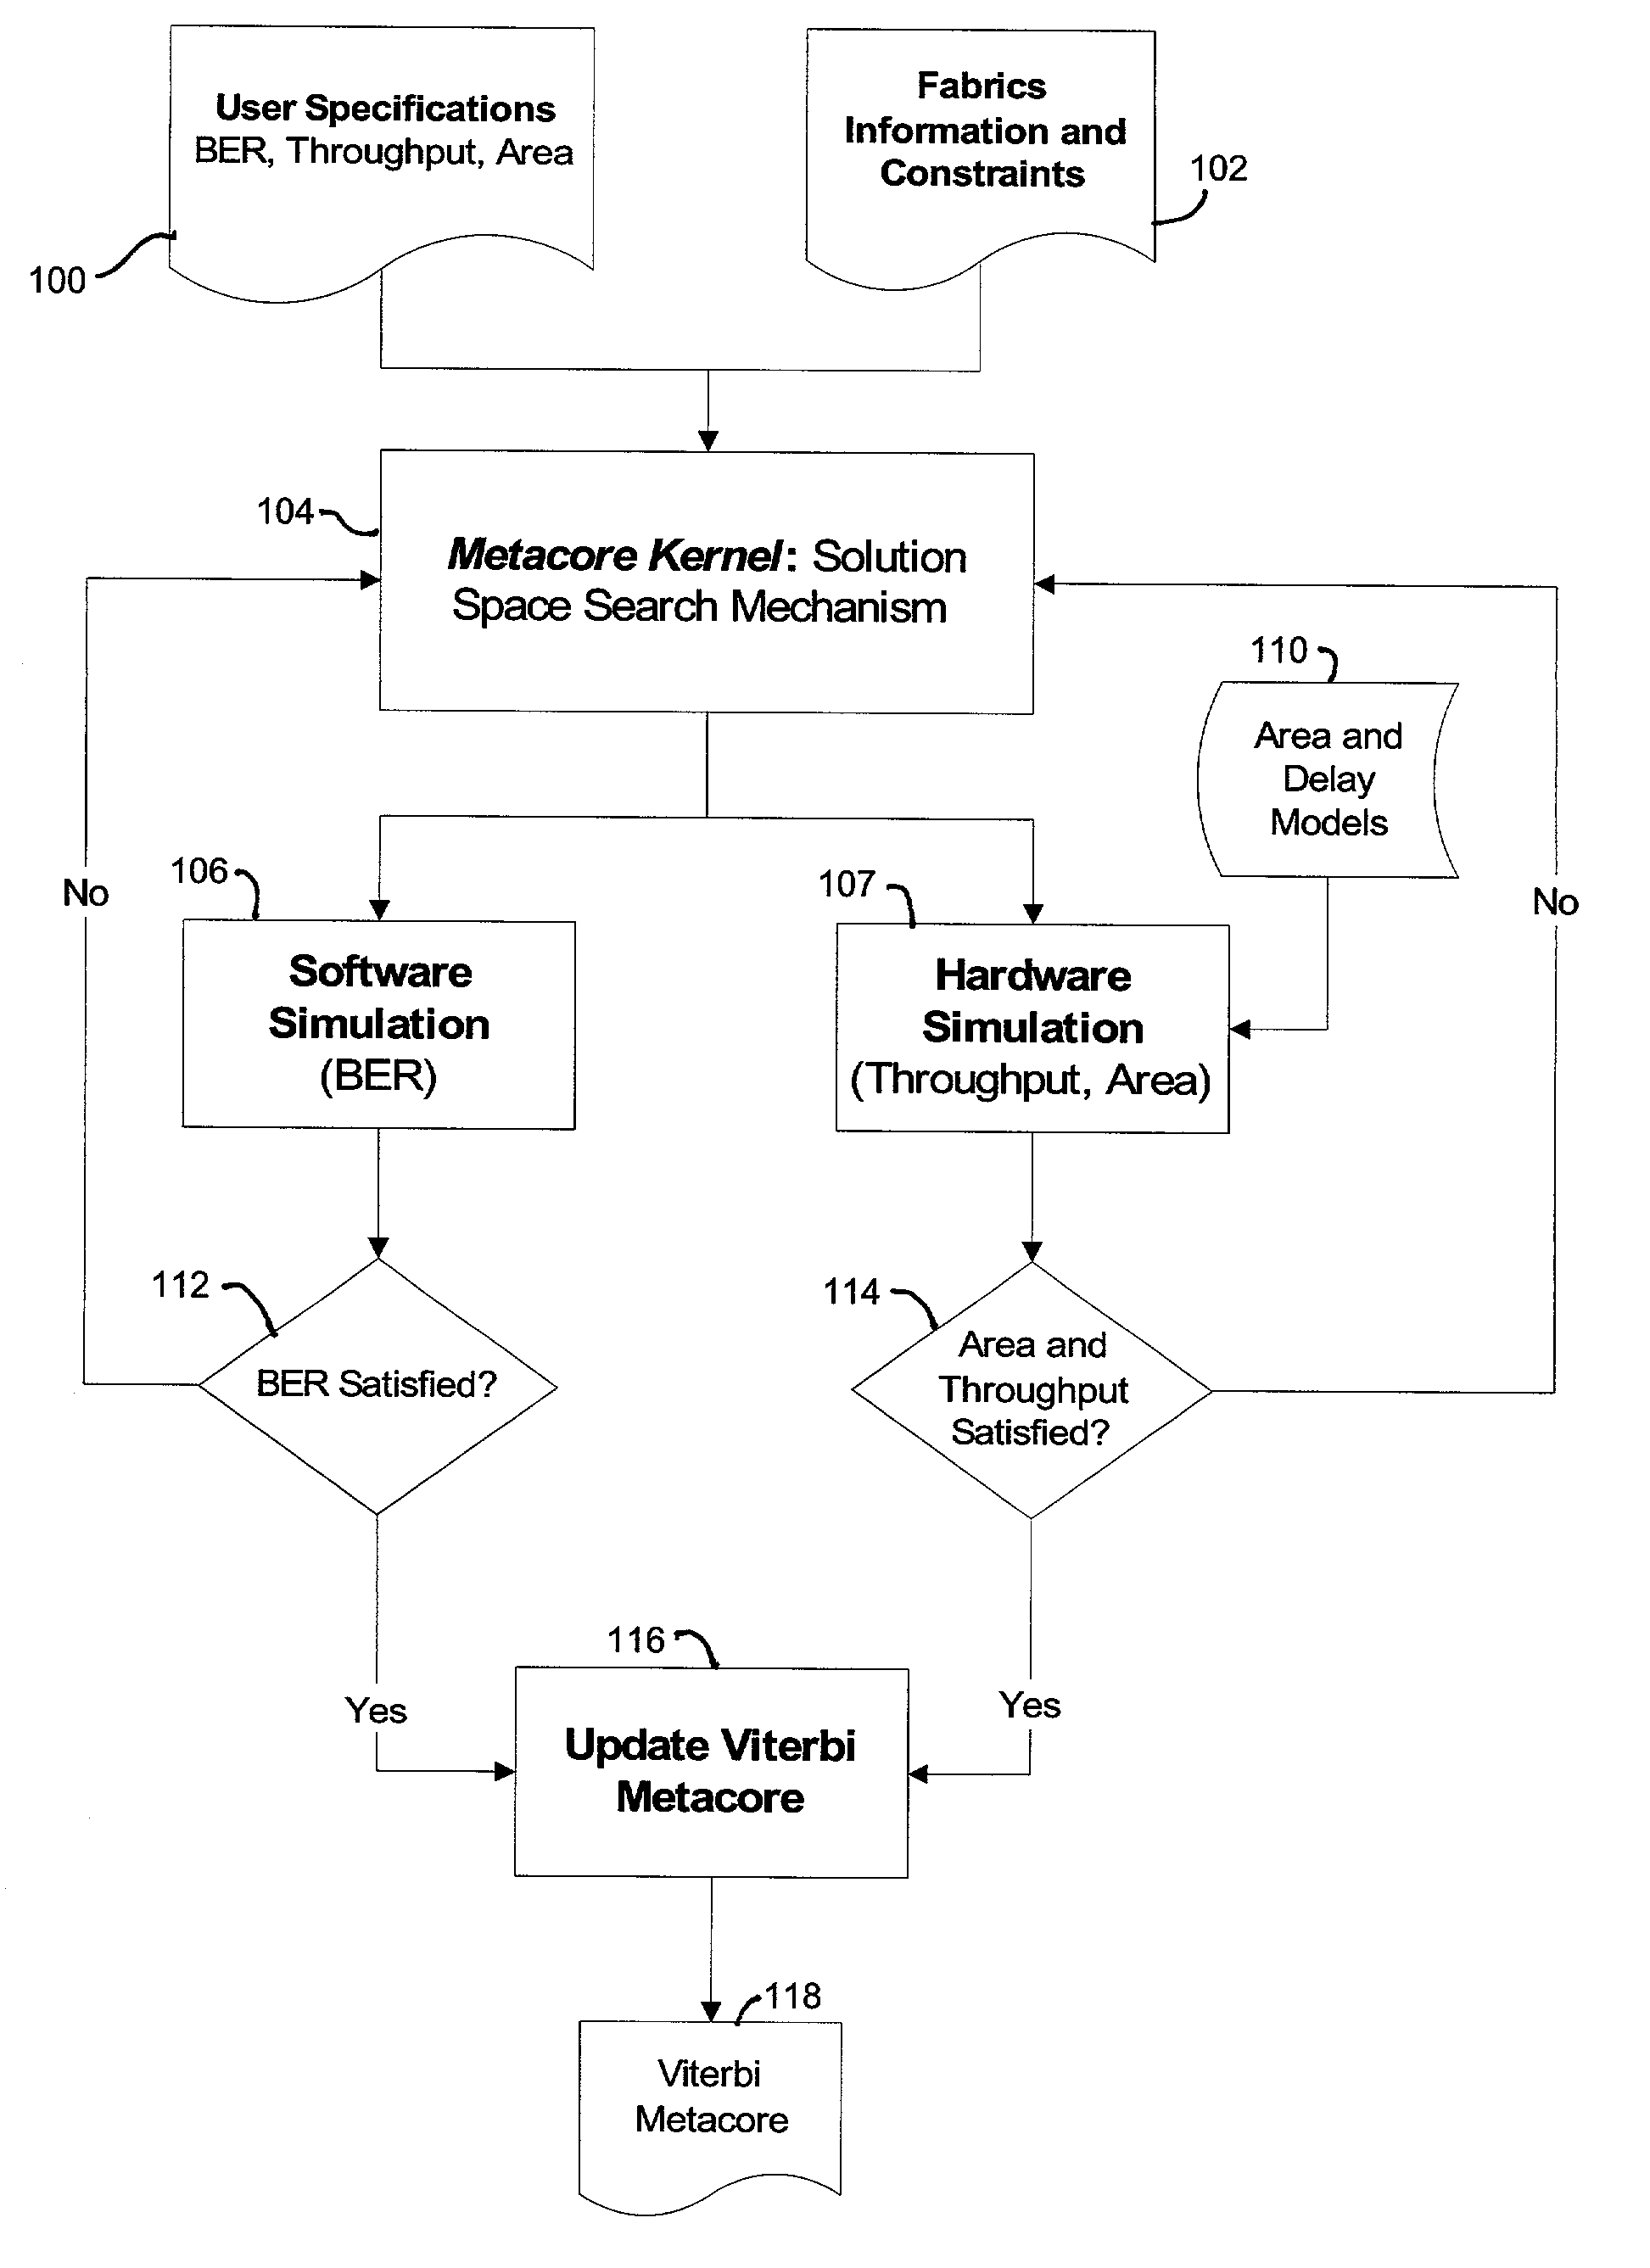 Design and optimization methods for integrated circuits